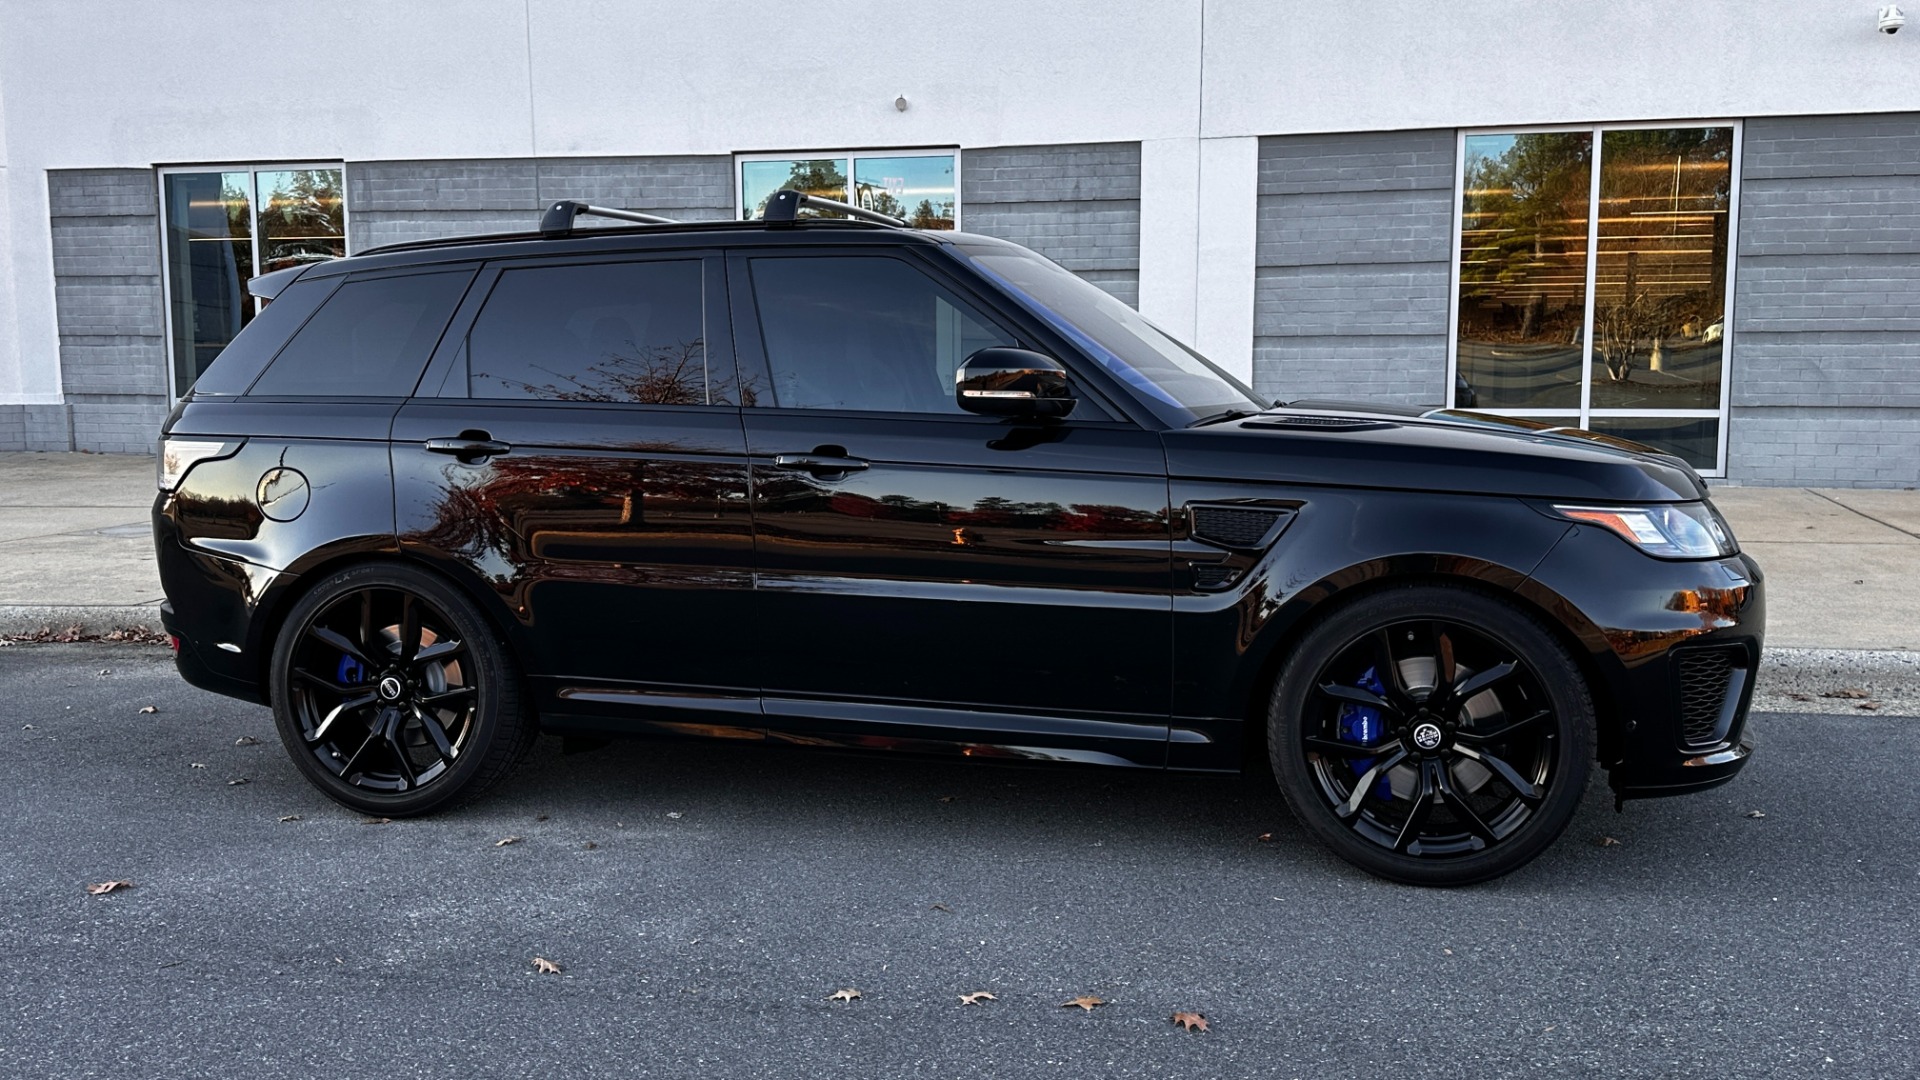 Used 2017 Land Rover Range Rover Sport SVR / DRIVE PRO PACKAGE / MERIDIAN SURROUND SOUND / SUPERCHARGED V8 / PANOR for sale $63,999 at Formula Imports in Charlotte NC 28227 2